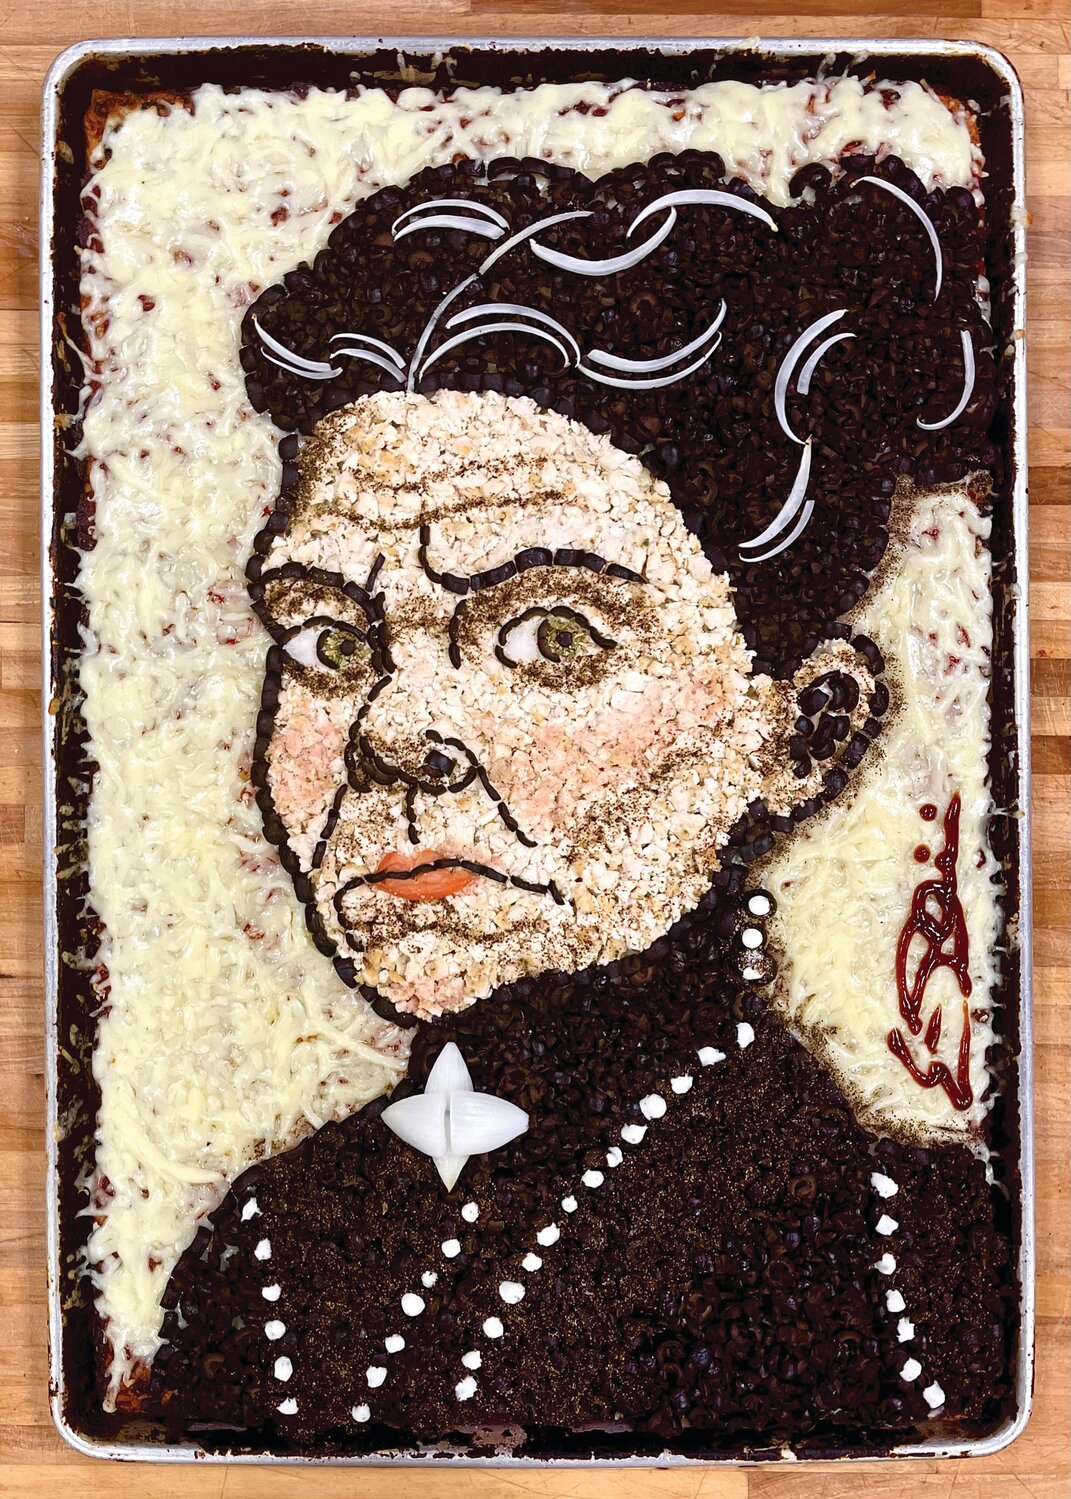 PIZZA ART: Eric Palmieri crafts portraits with pizza. He’s tackled an array of subjects from action star Sylvester Stallon to late Fall River murderess Lizzie Borden, to pizza reviewer and Barstool Sports magnate Dave Portnoy. (Submitted photo)